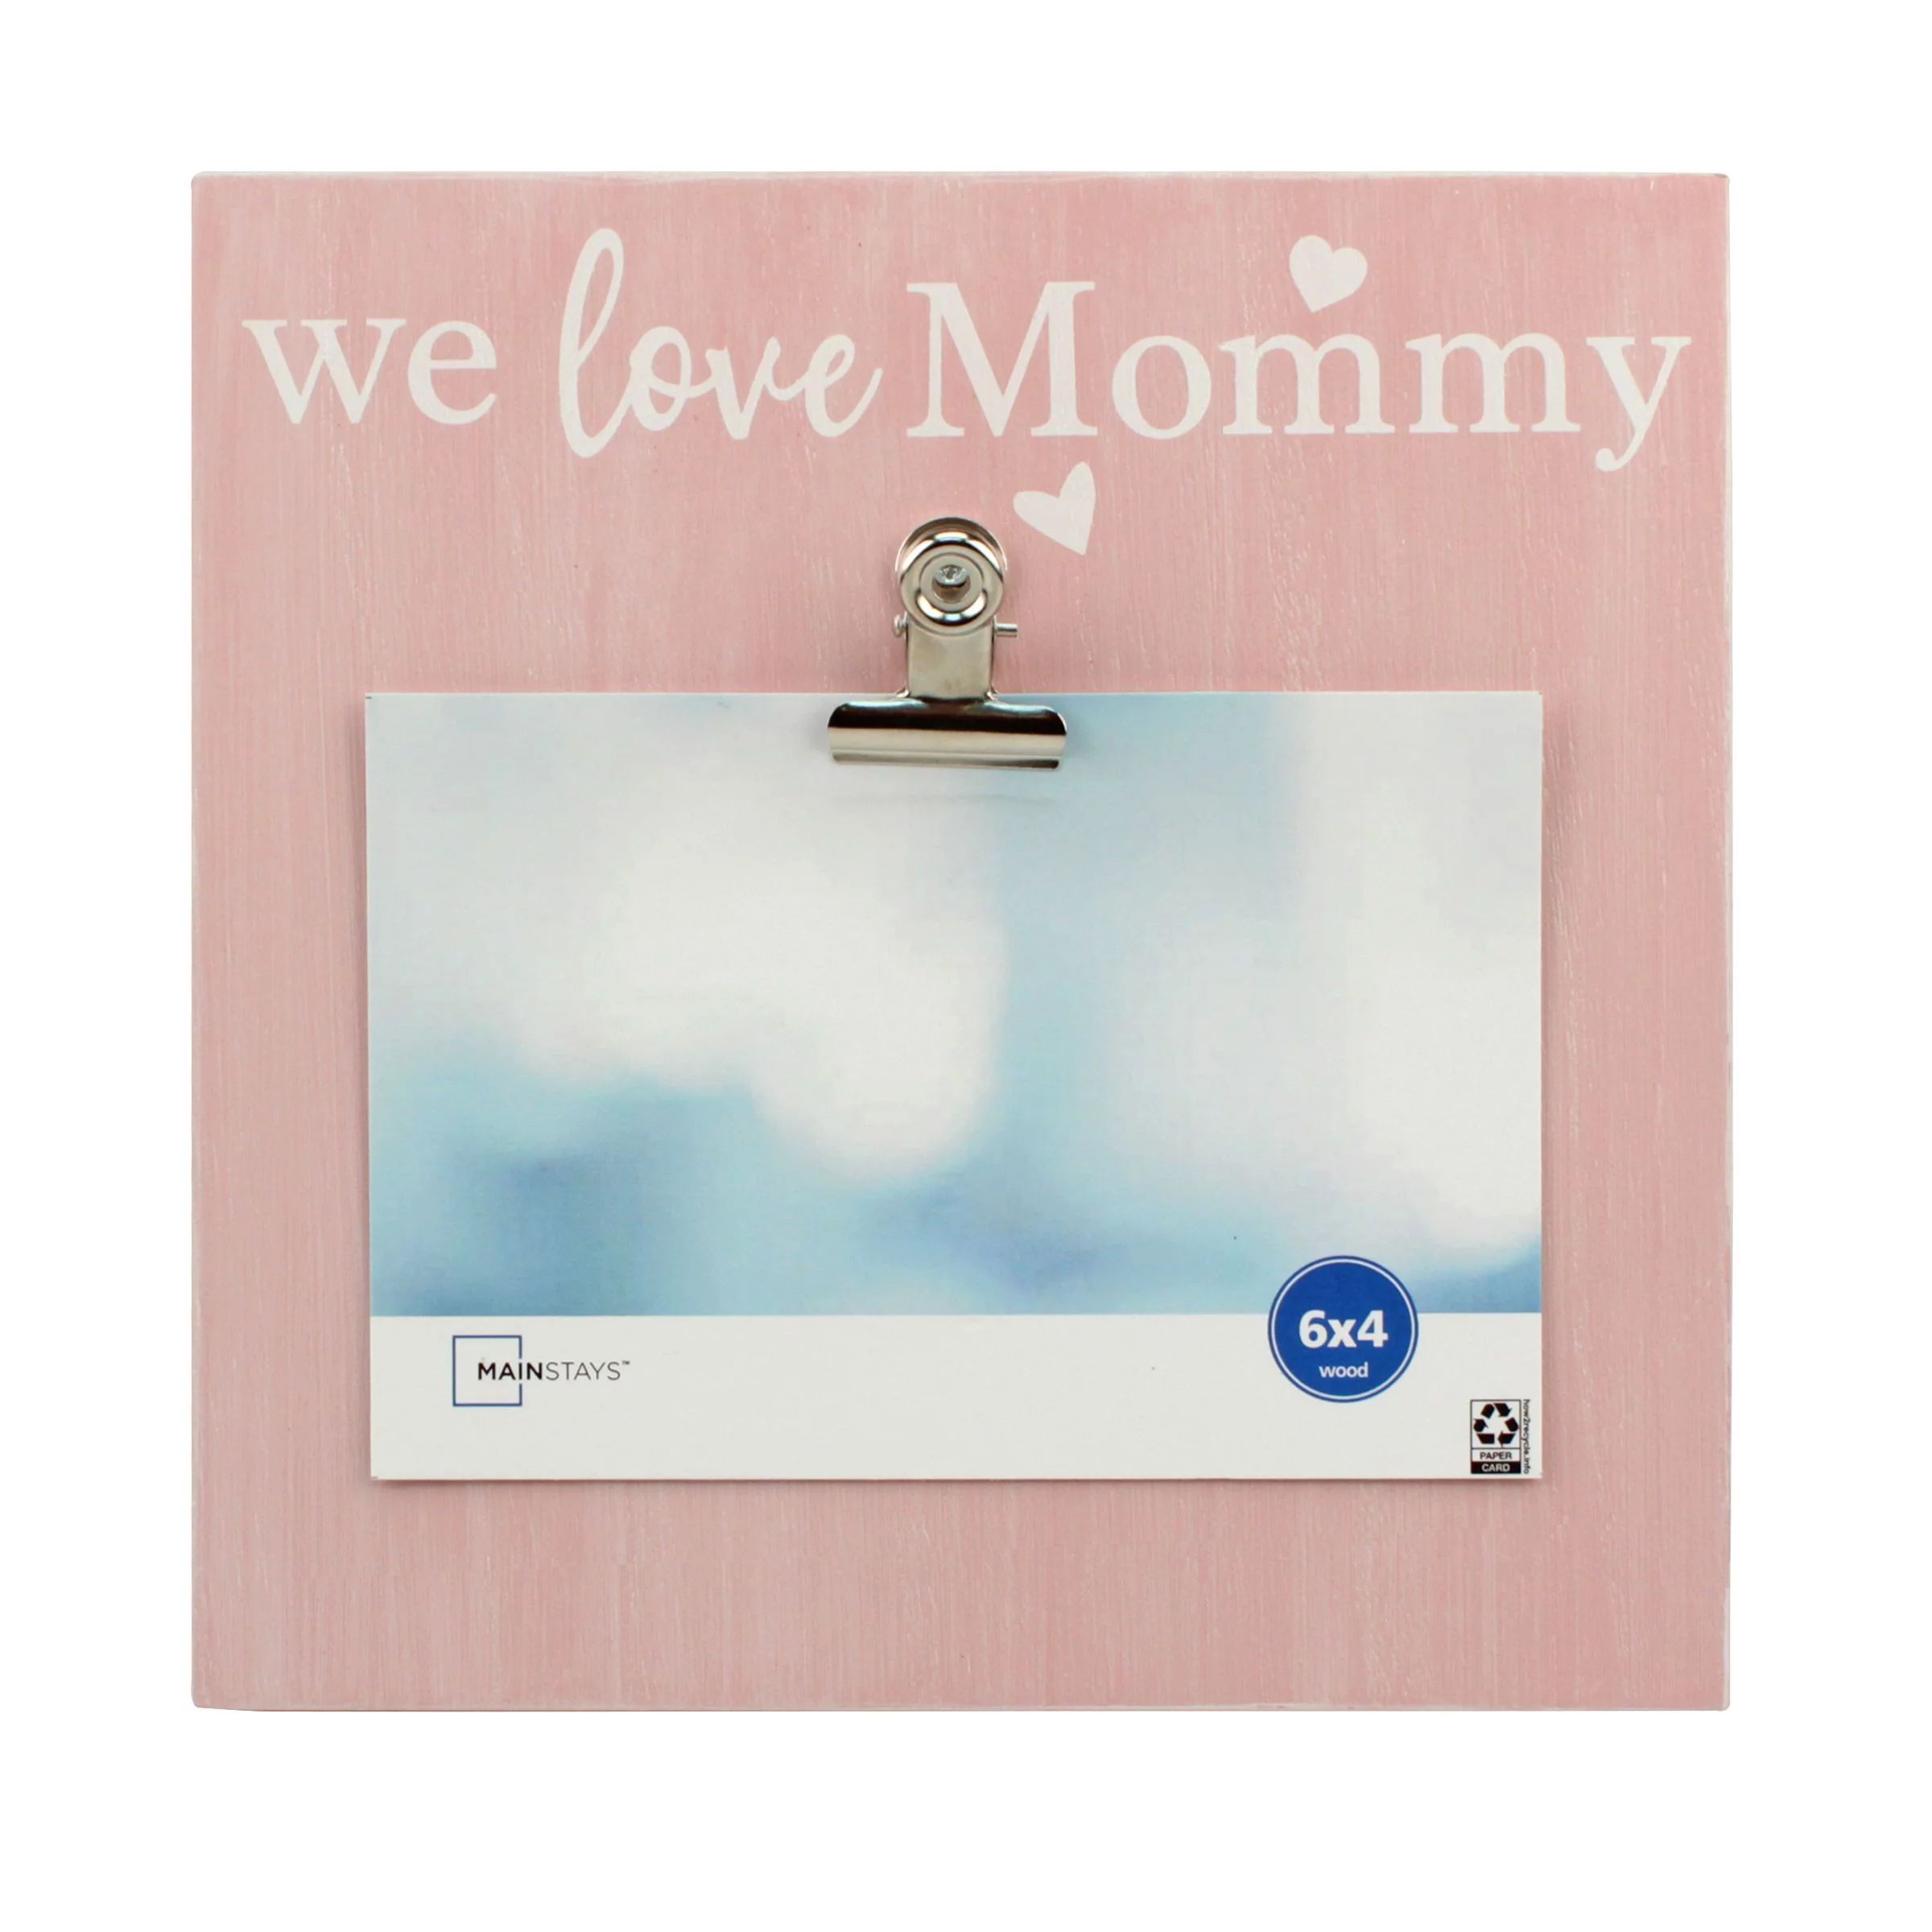 Mainstays 6" x 4" Square 'We Love Mommy' Wood Wall Hanging Single Clip Photo Frame, Pink | Walmart (US)